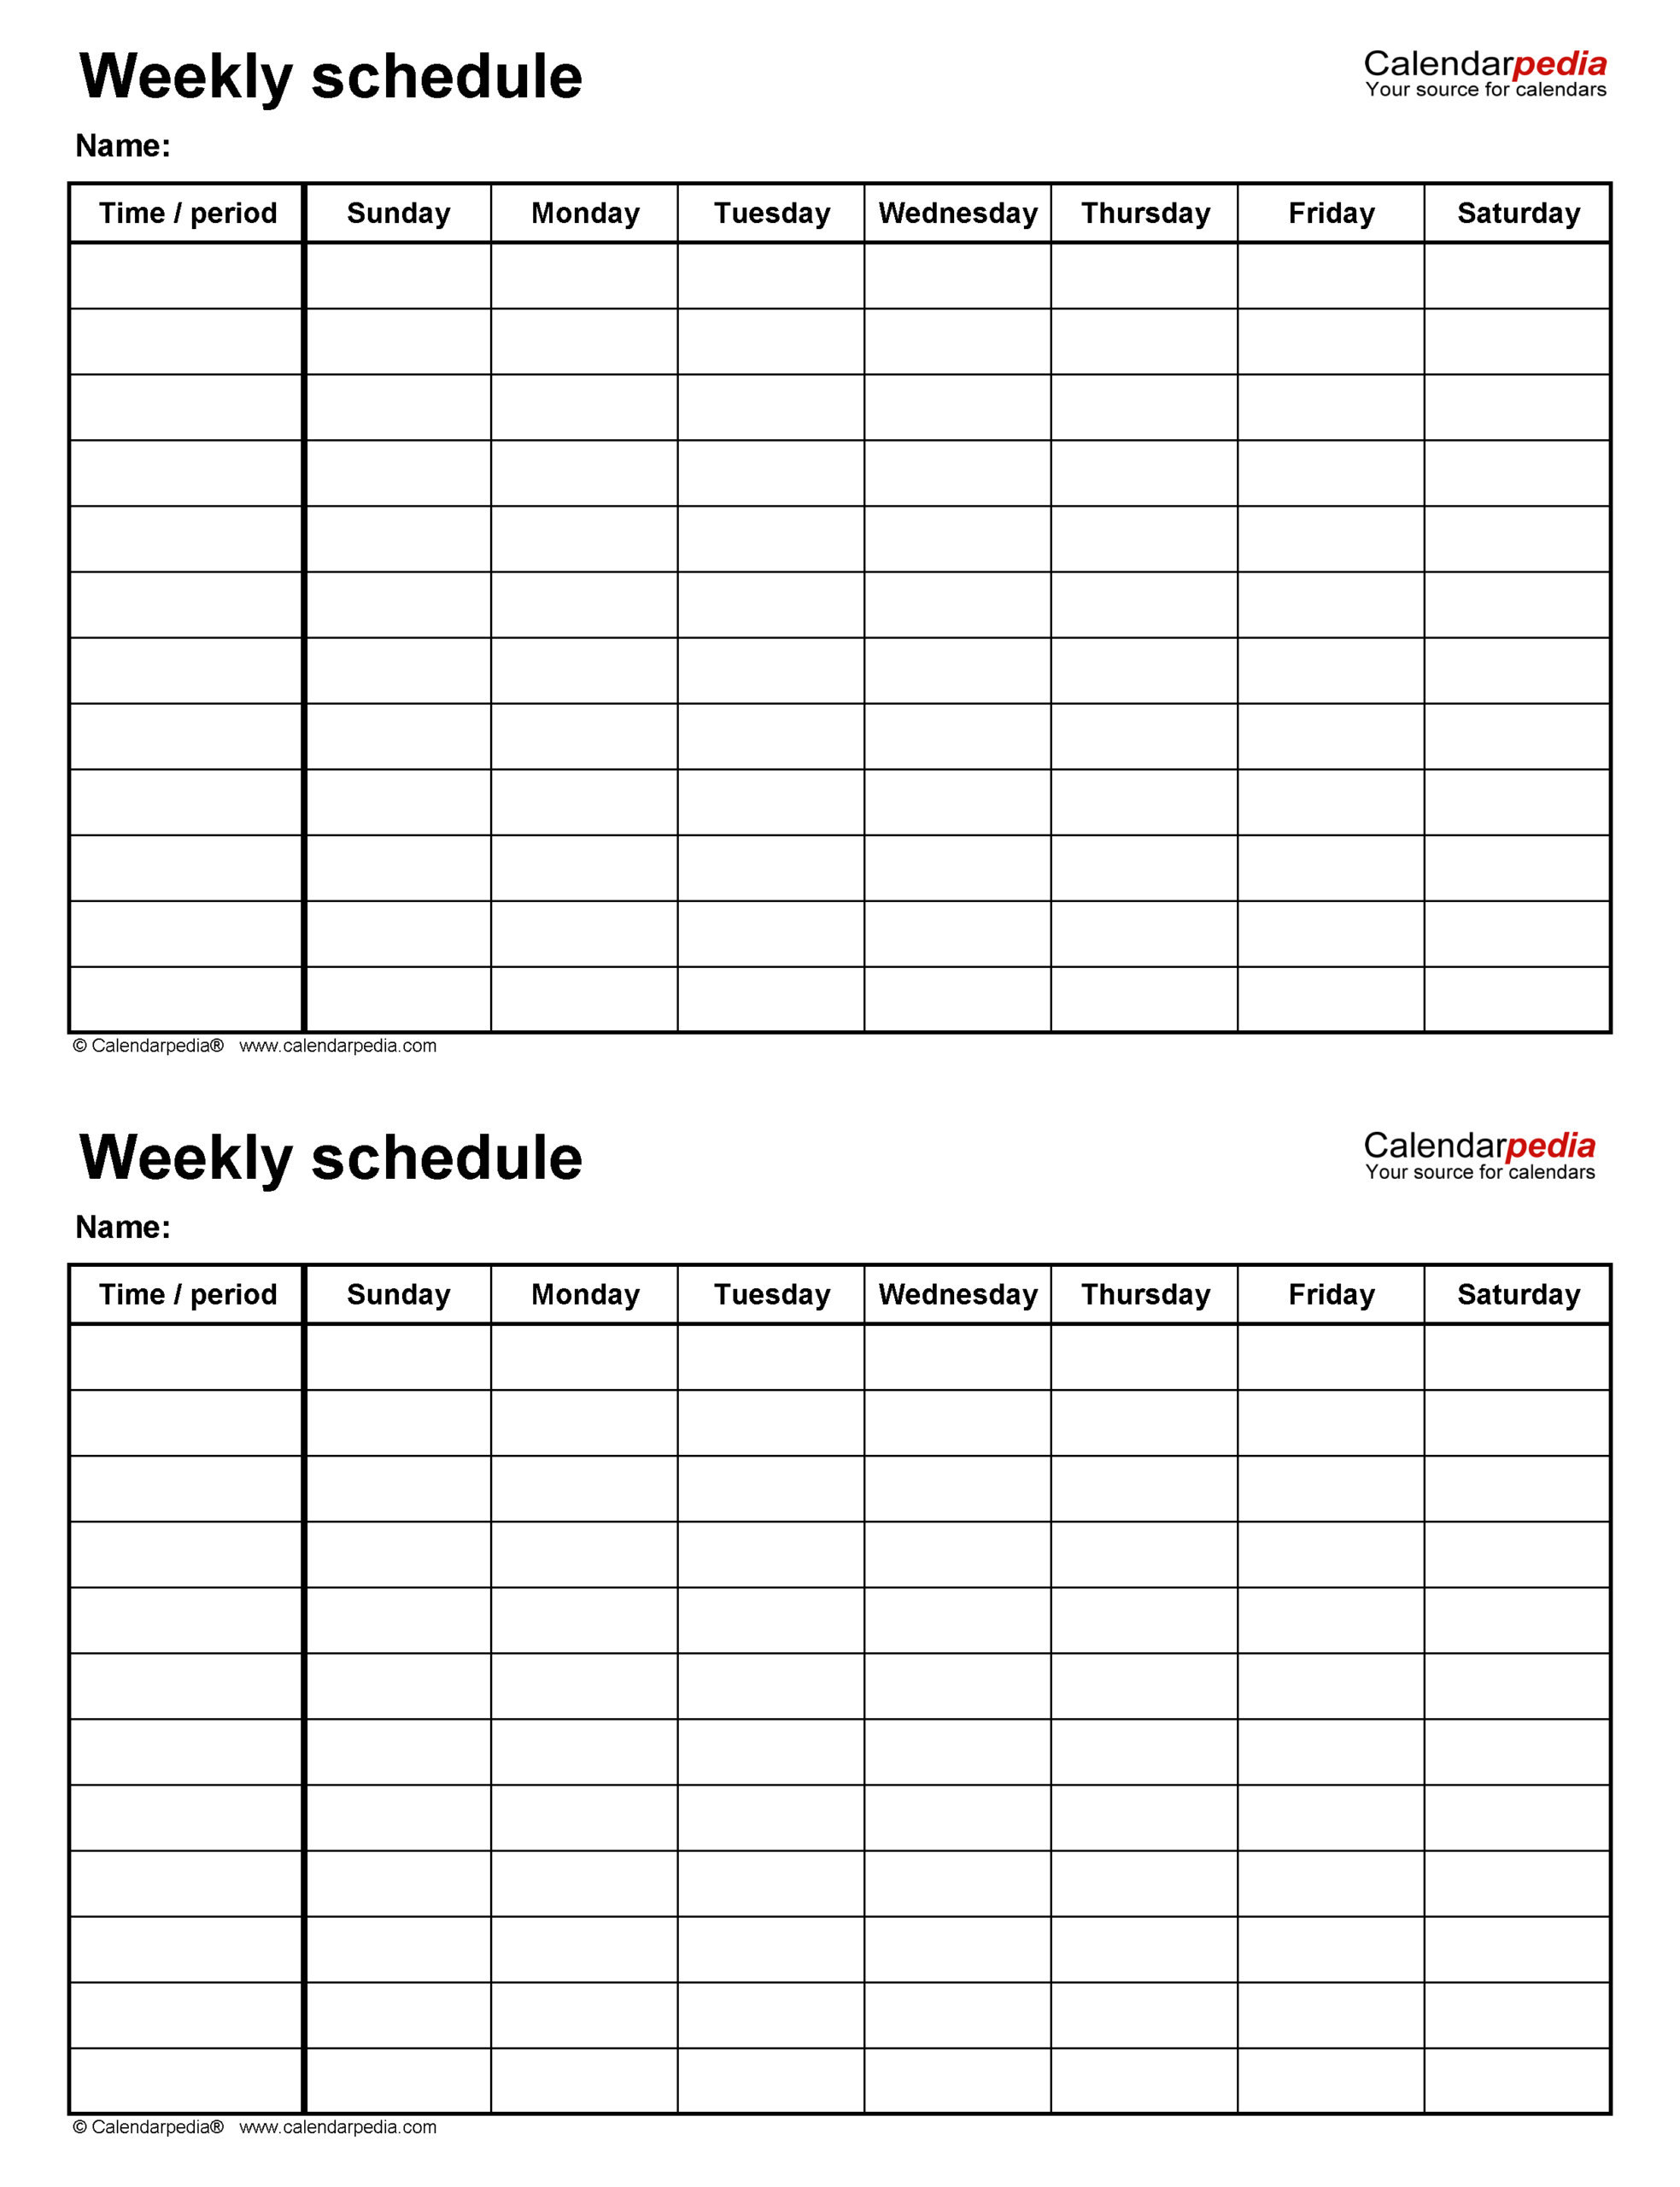 Free Weekly Schedule Templates For Word  18 Templates in Saturday Through Friday Calendar